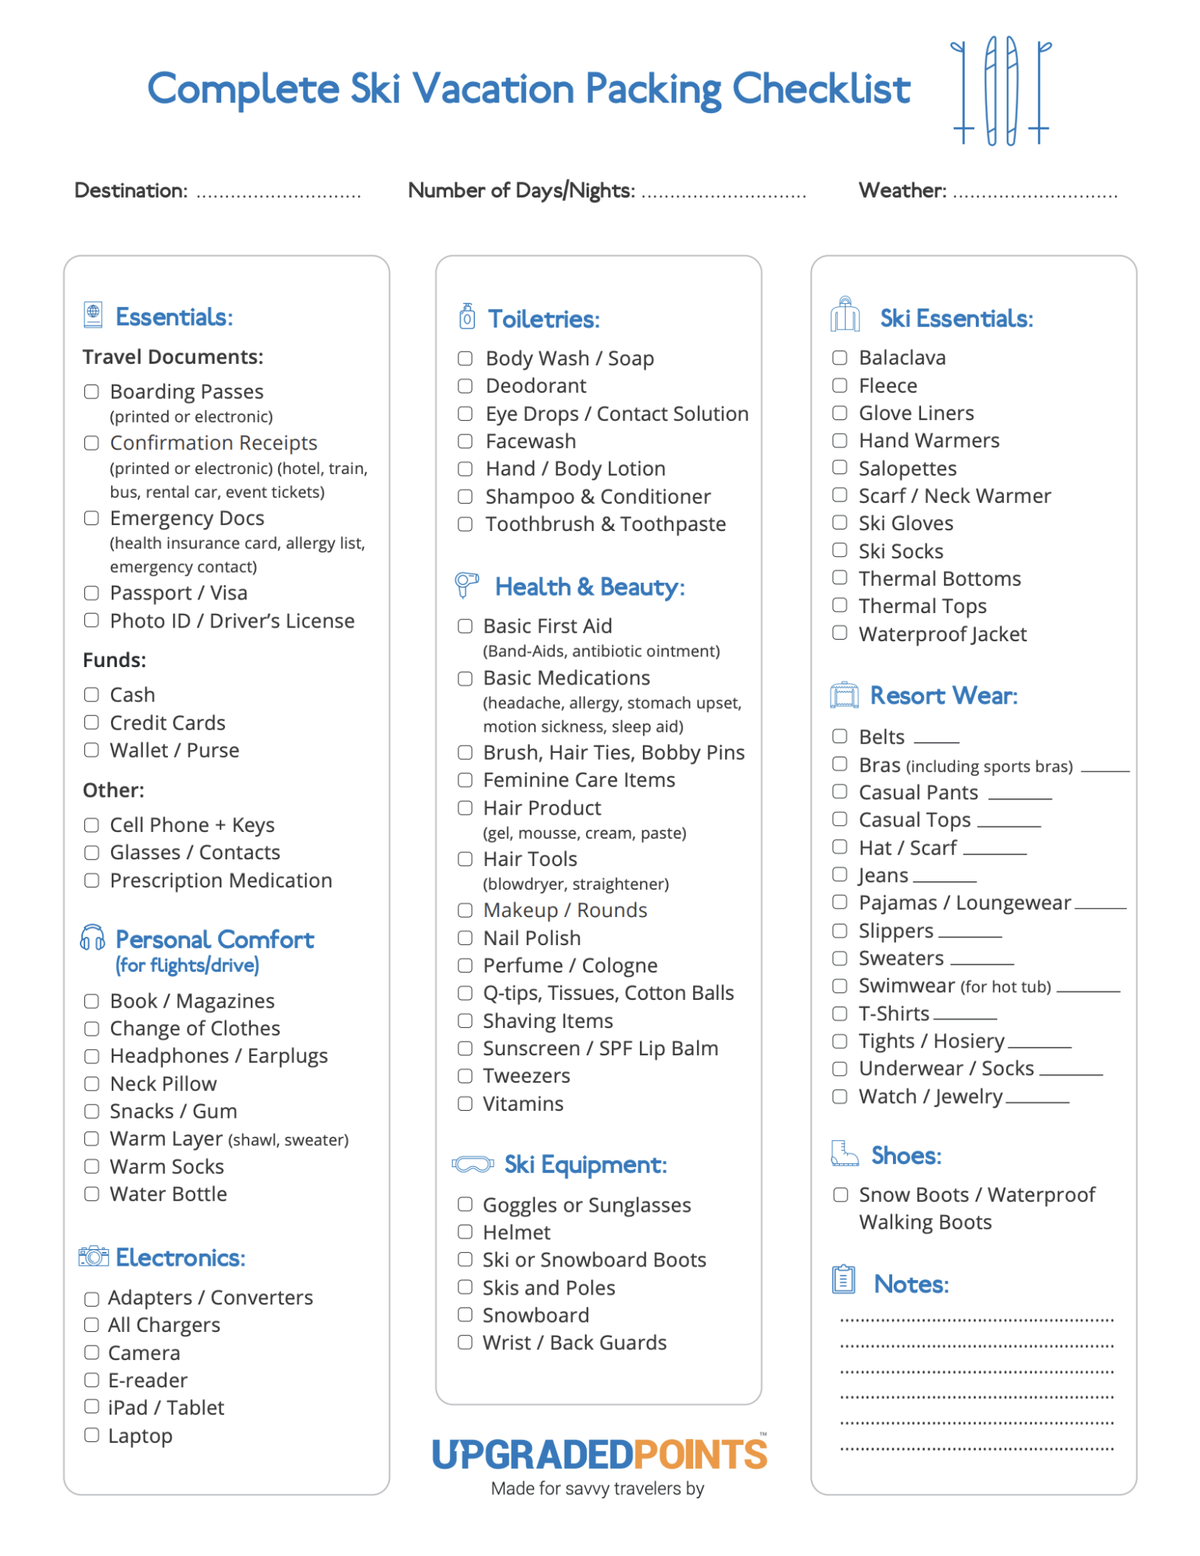 Complete Ski and Snowboard Packing List - Printable